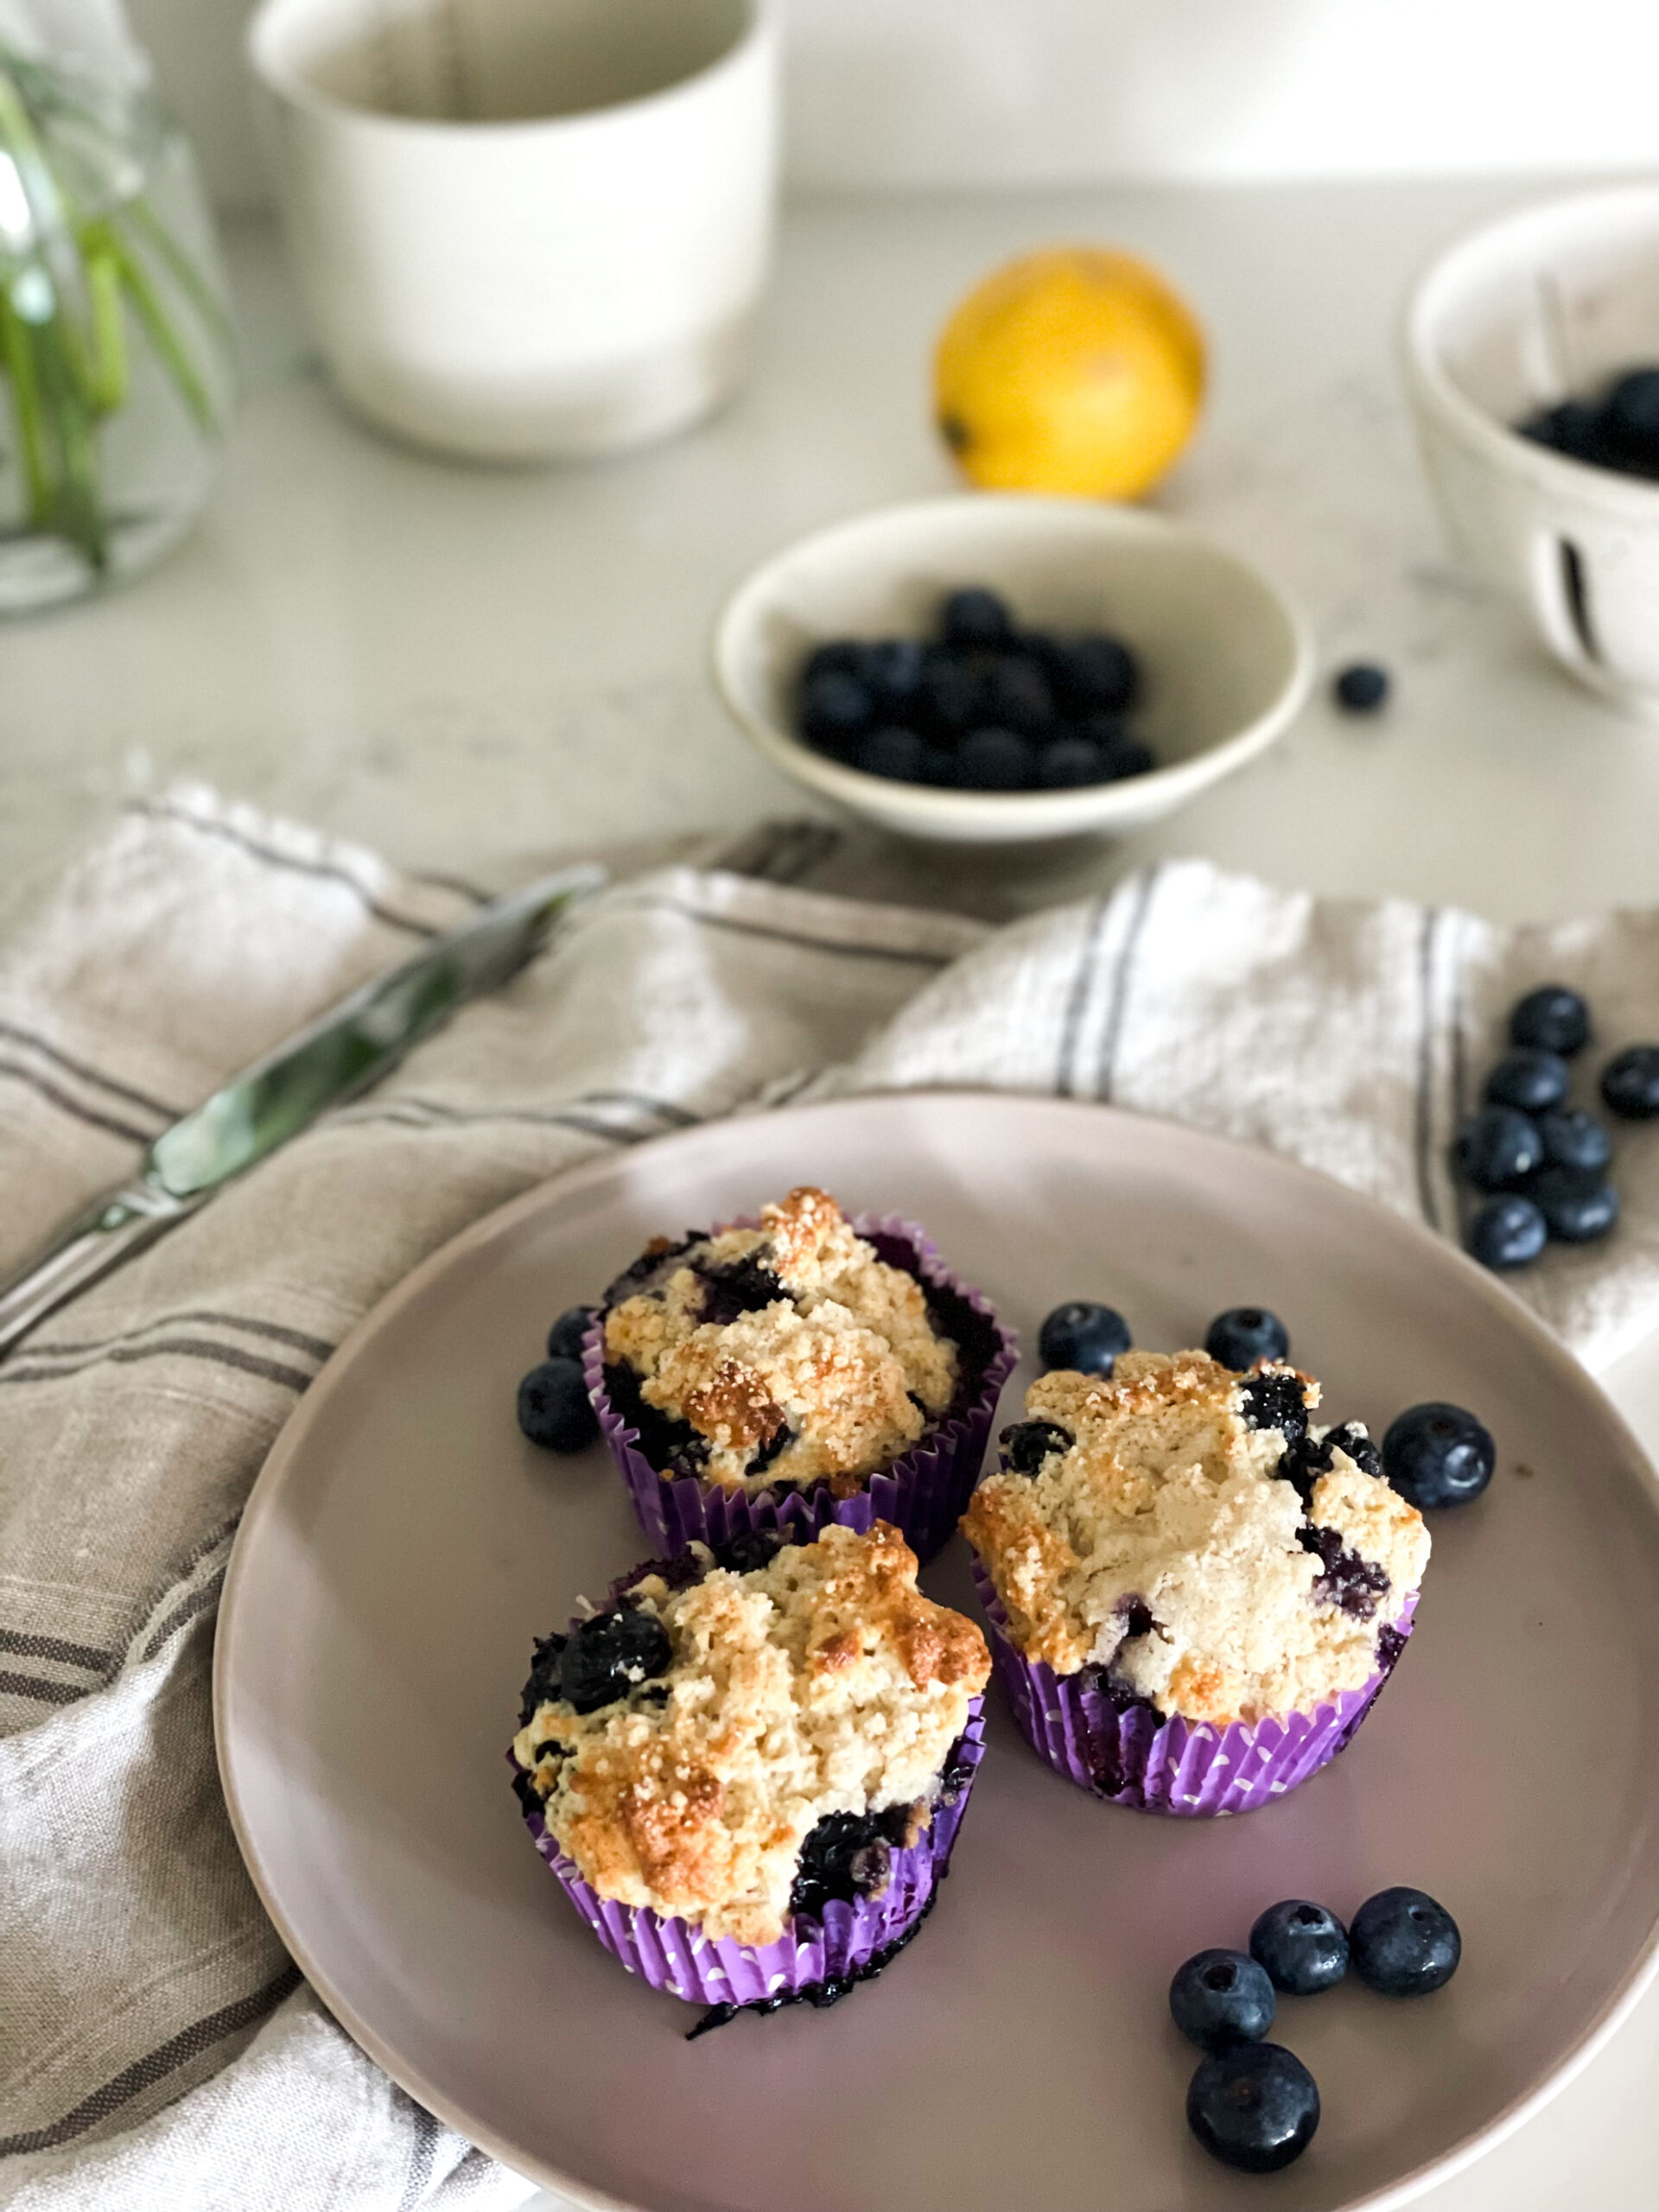 gluten-free blueberry lemon muffins on a plate in the foreground